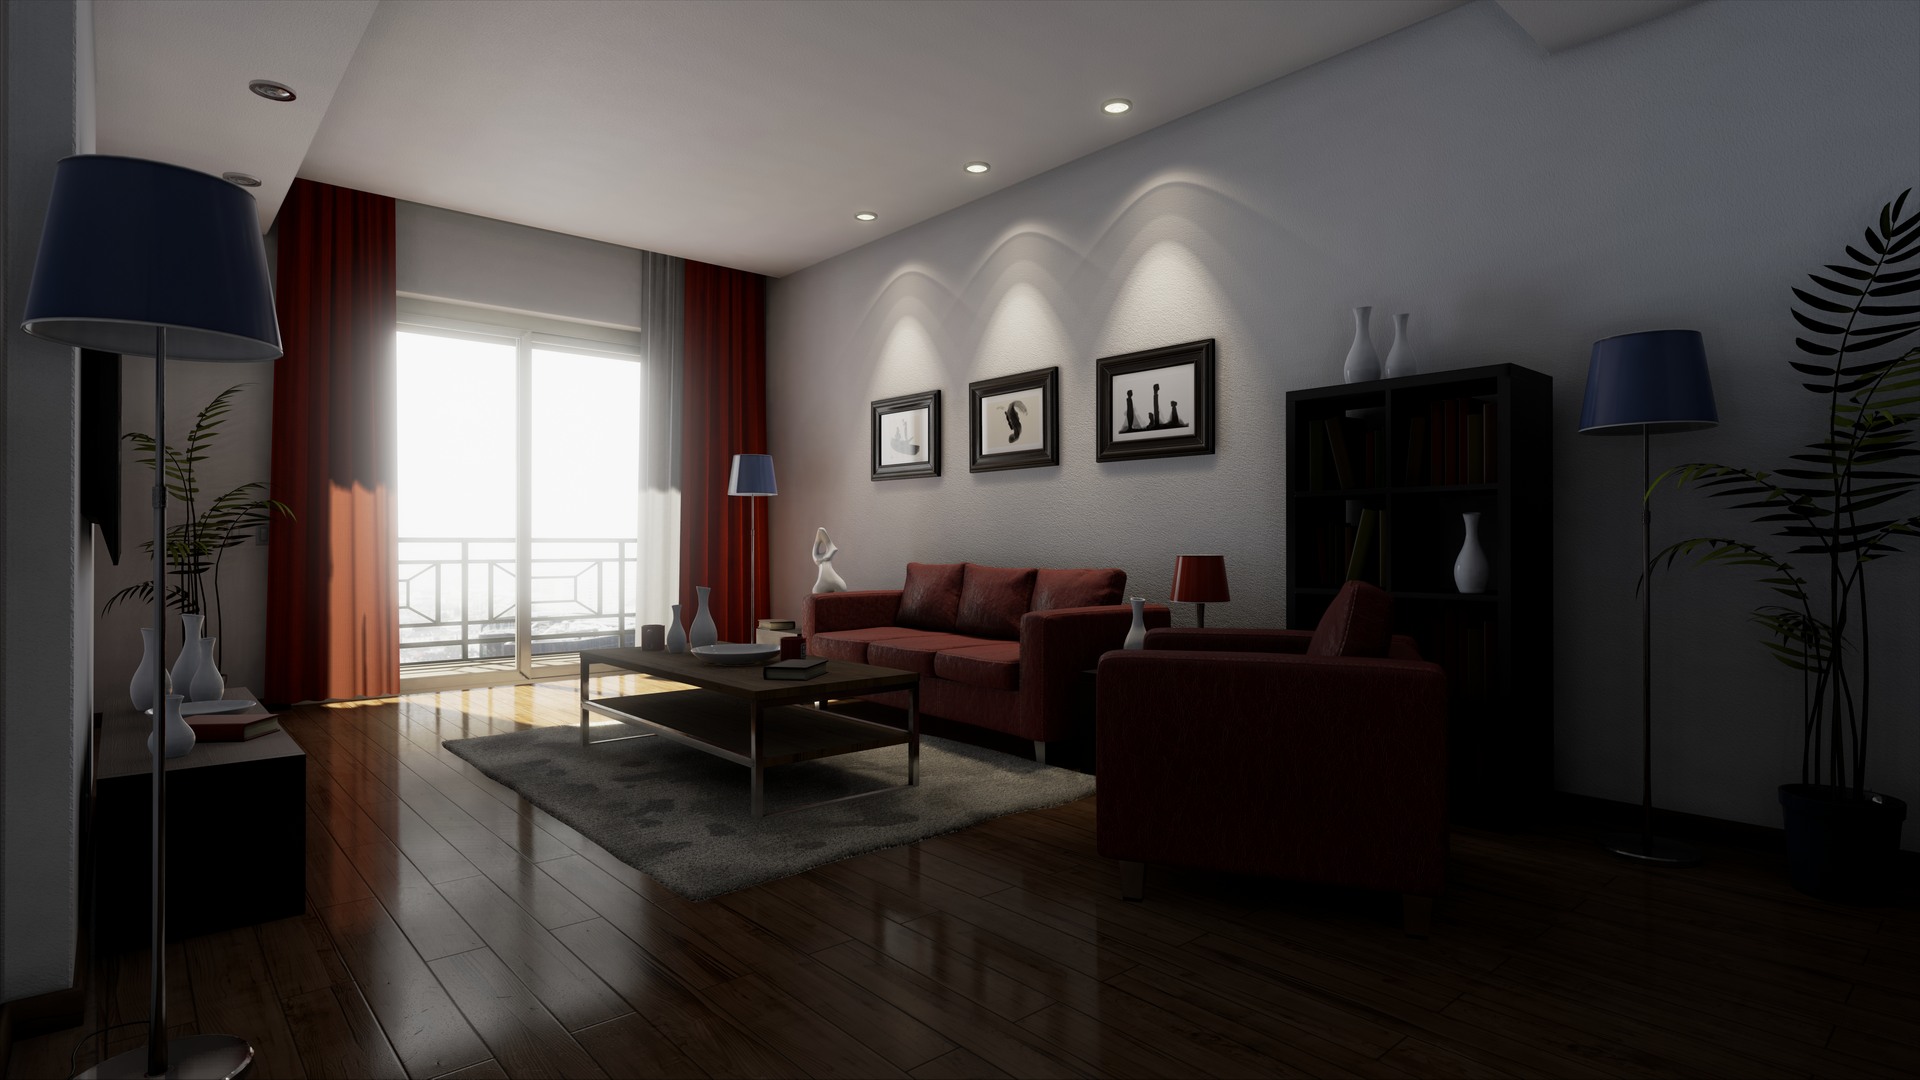 These 8K Screenshots From Unreal Engine 4's Tech Demos Will Leave You